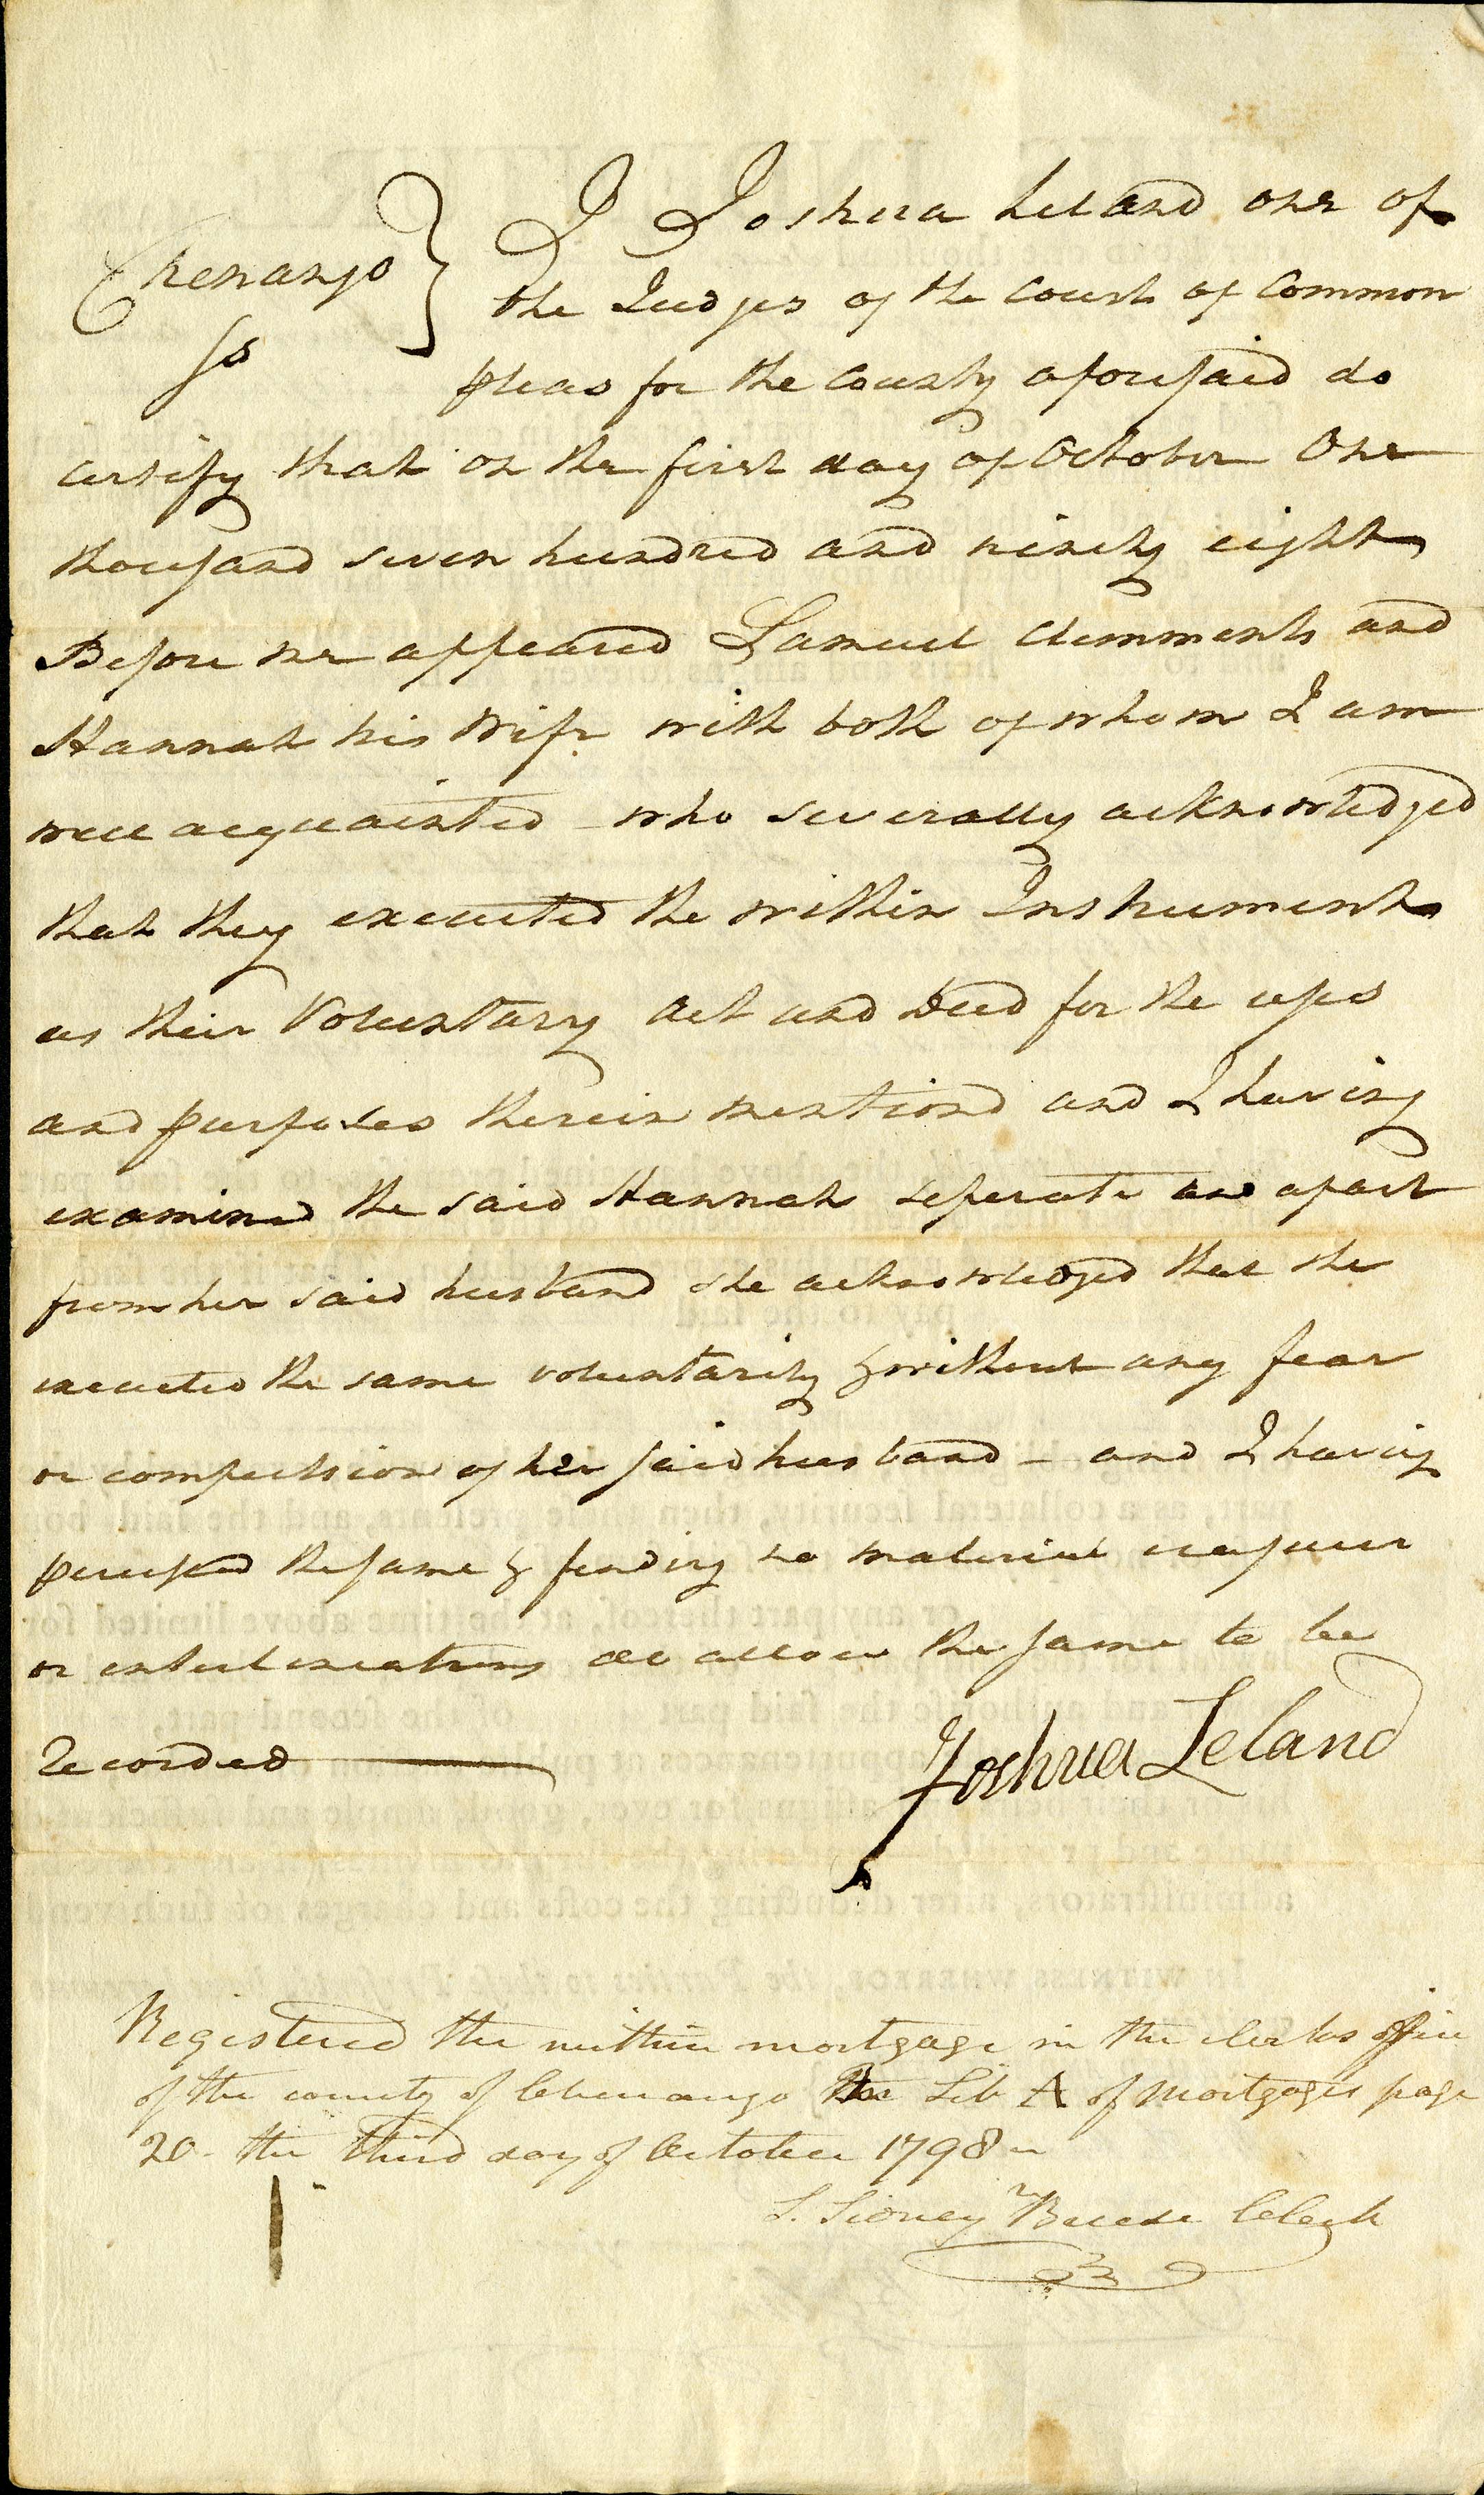 Indenture document from 1798 concerning a land transaction. From the T.S. Gold Family Papers